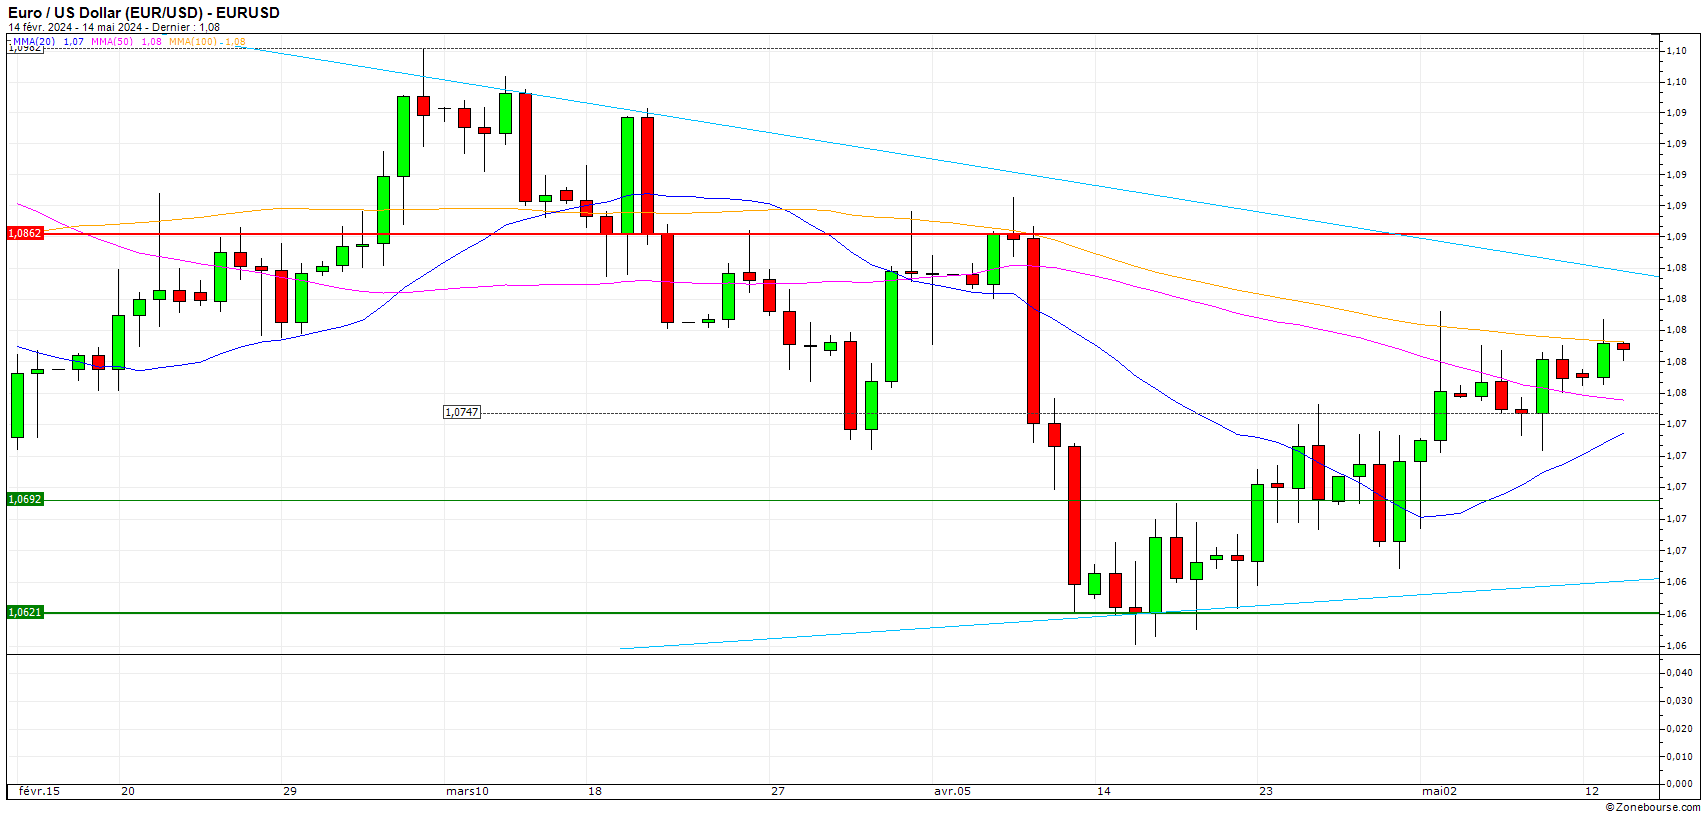 https://www.zonebourse.com/zbcache/charts/ObjectChart.aspx?Name=4591&Type=Custom&Intraday=1&Width=1707&Height=817&Cycle=DAY1&Duration=3&Render=Candle&ShowCopyright=2&ShowVolume=1&ShowName=1